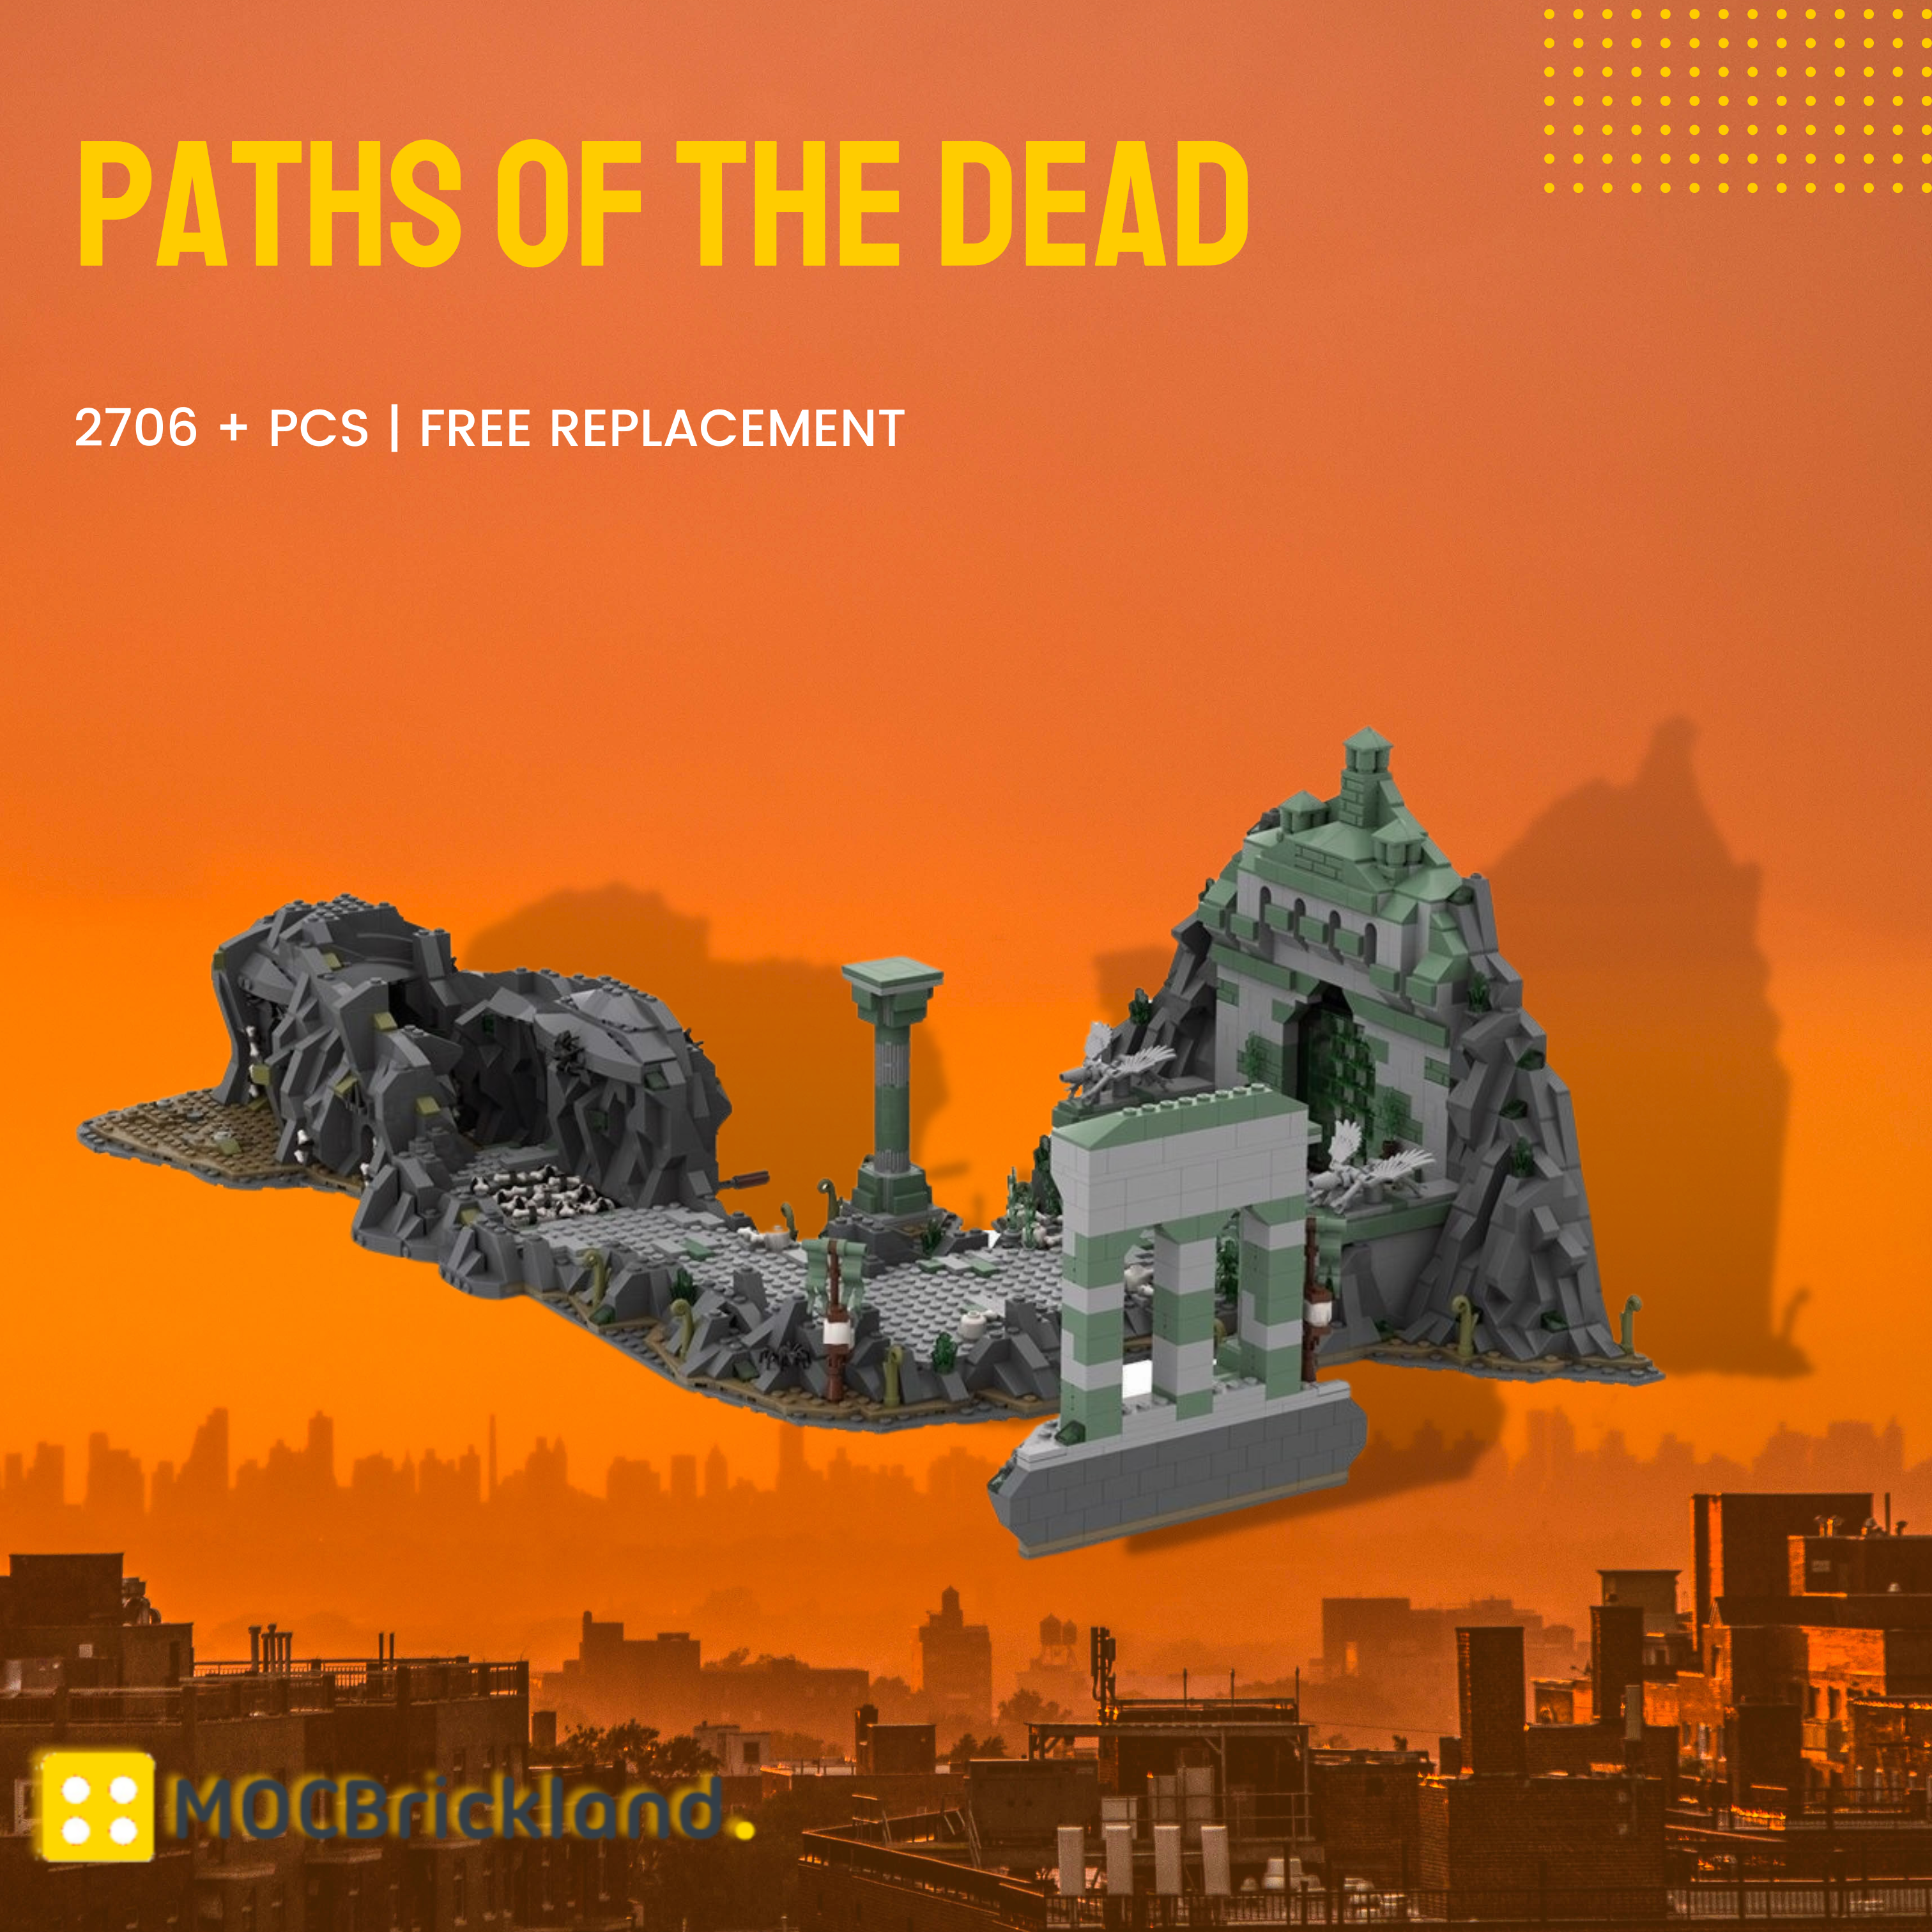 Movie MOC-38624 Paths of the Dead MOCBRICKLAND